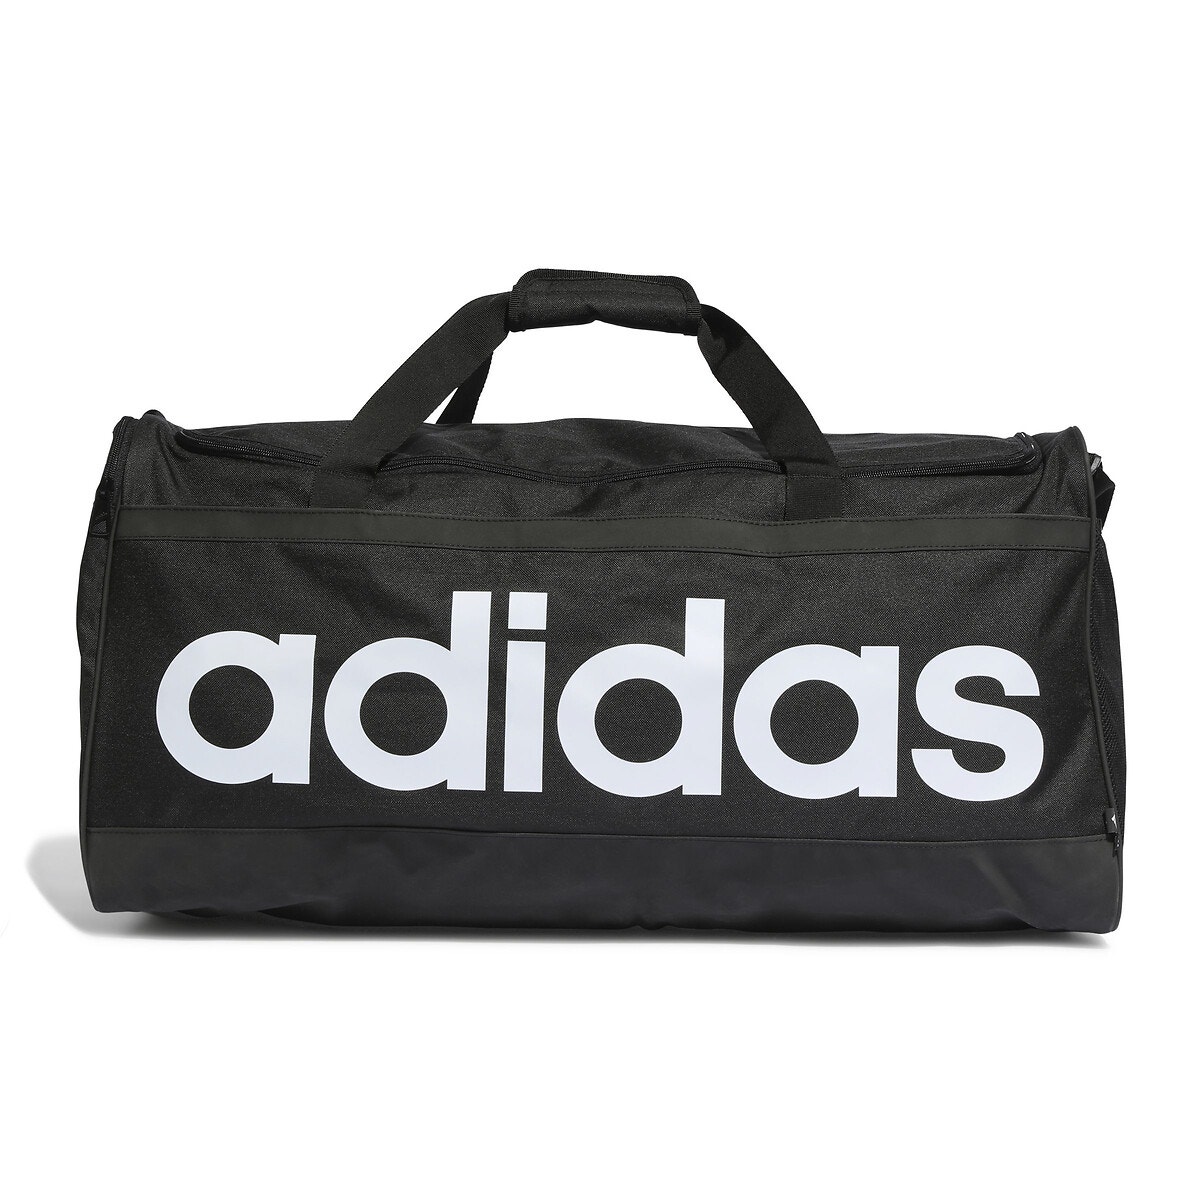 Sacoche Noire Homme Adidas Linear